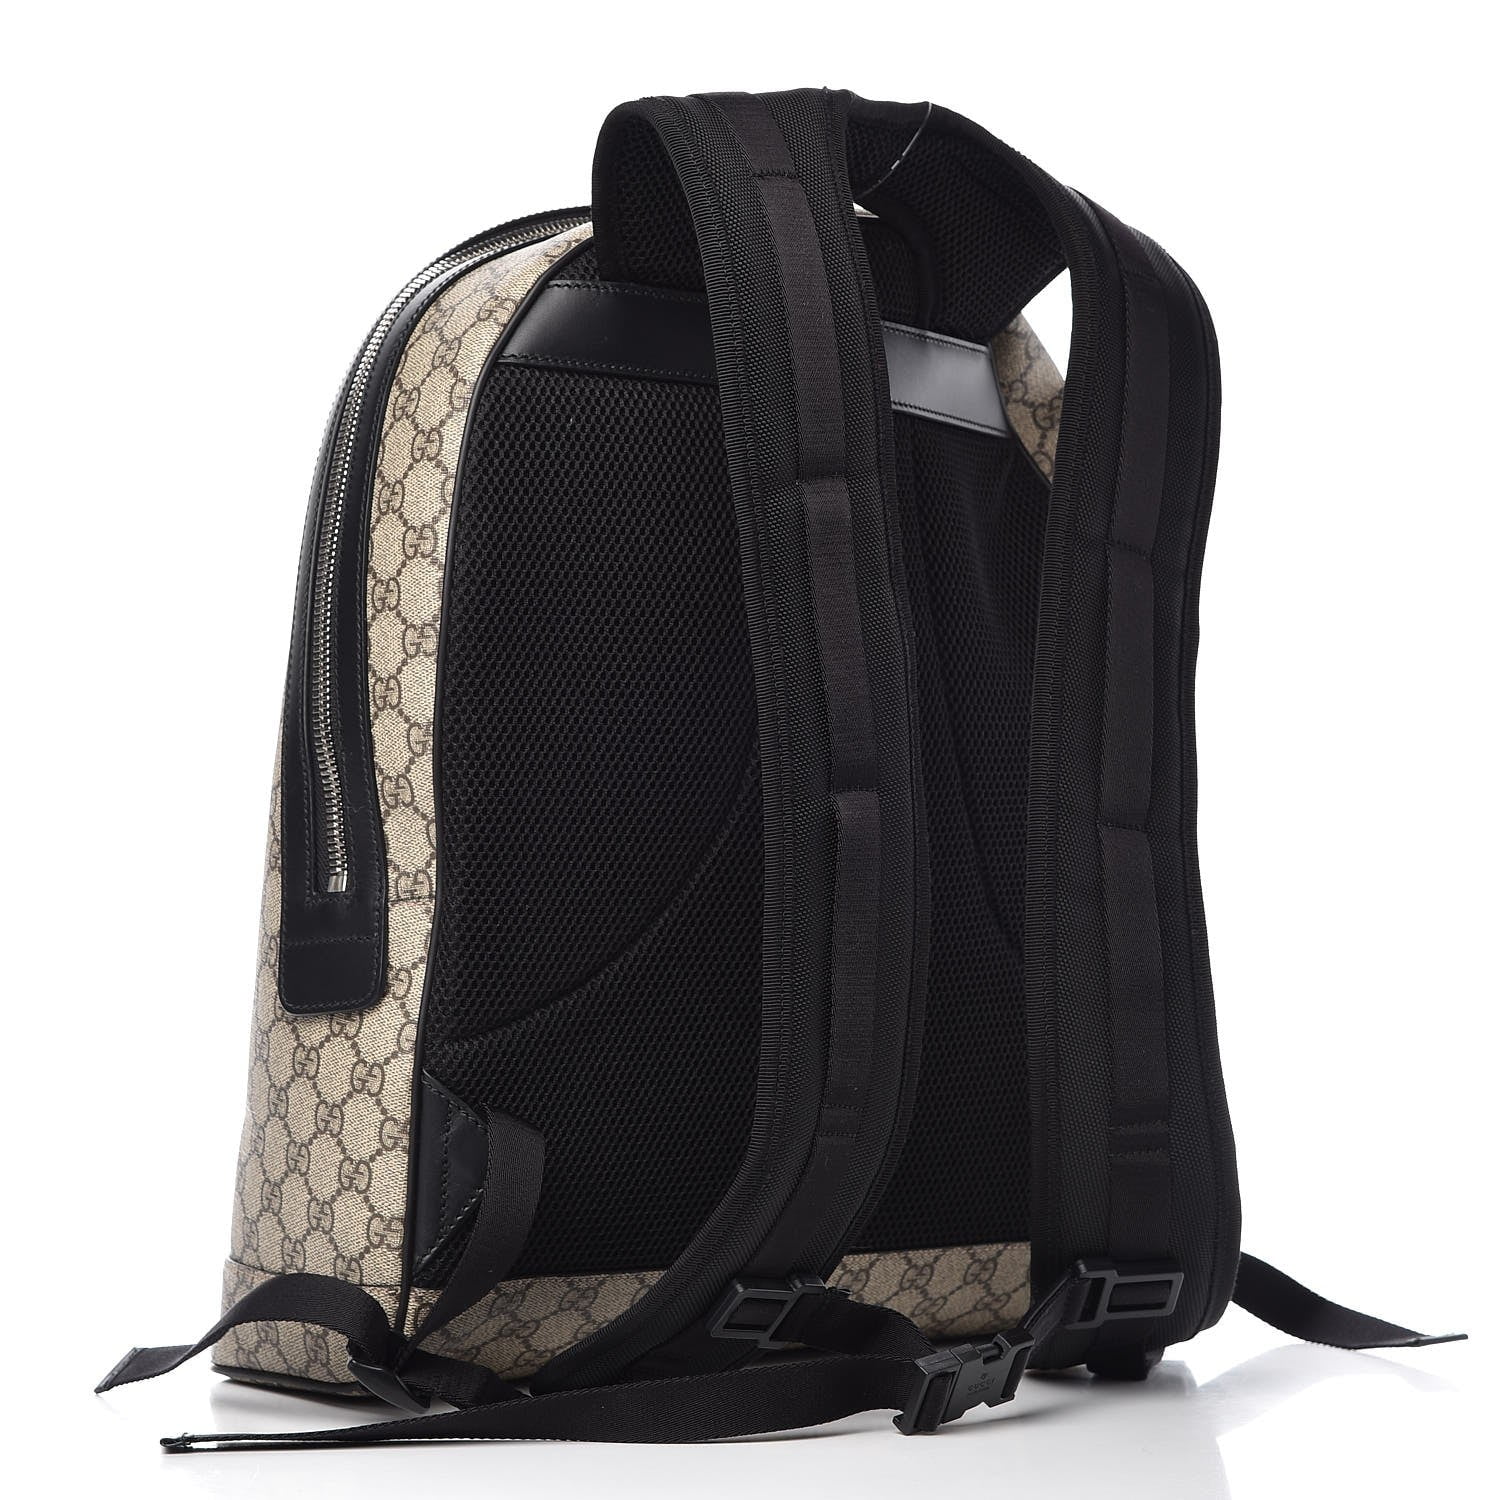 GUCCI GG Supreme Small Backpack Leather Beige Black 429020 Purse 90191279